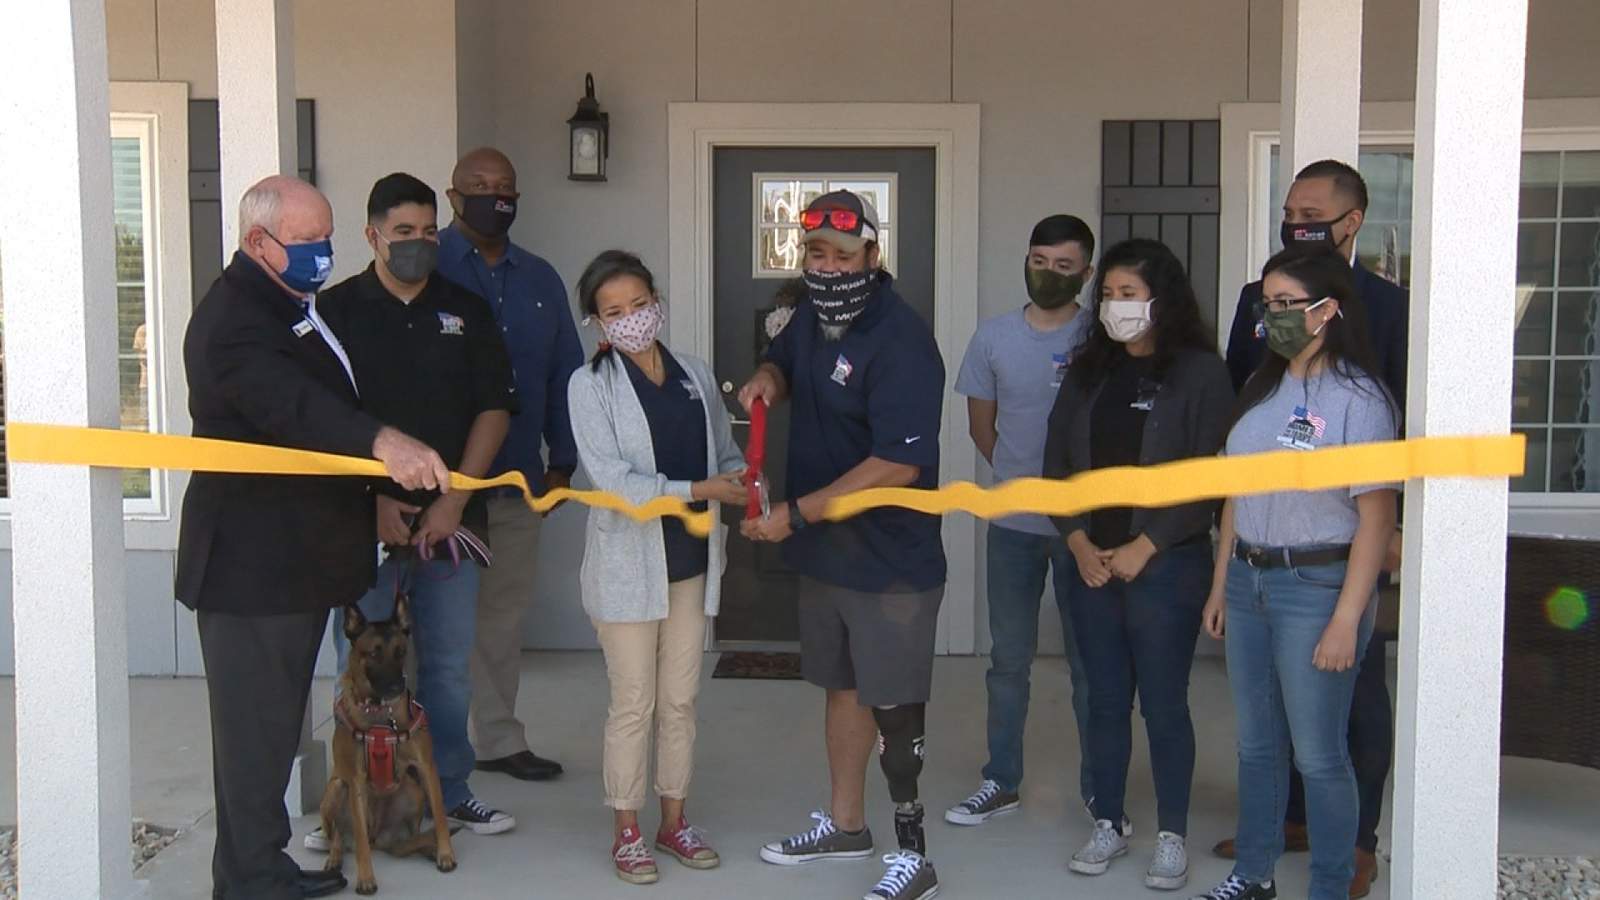 Wounded veteran gets keys to new home on Veterans Day